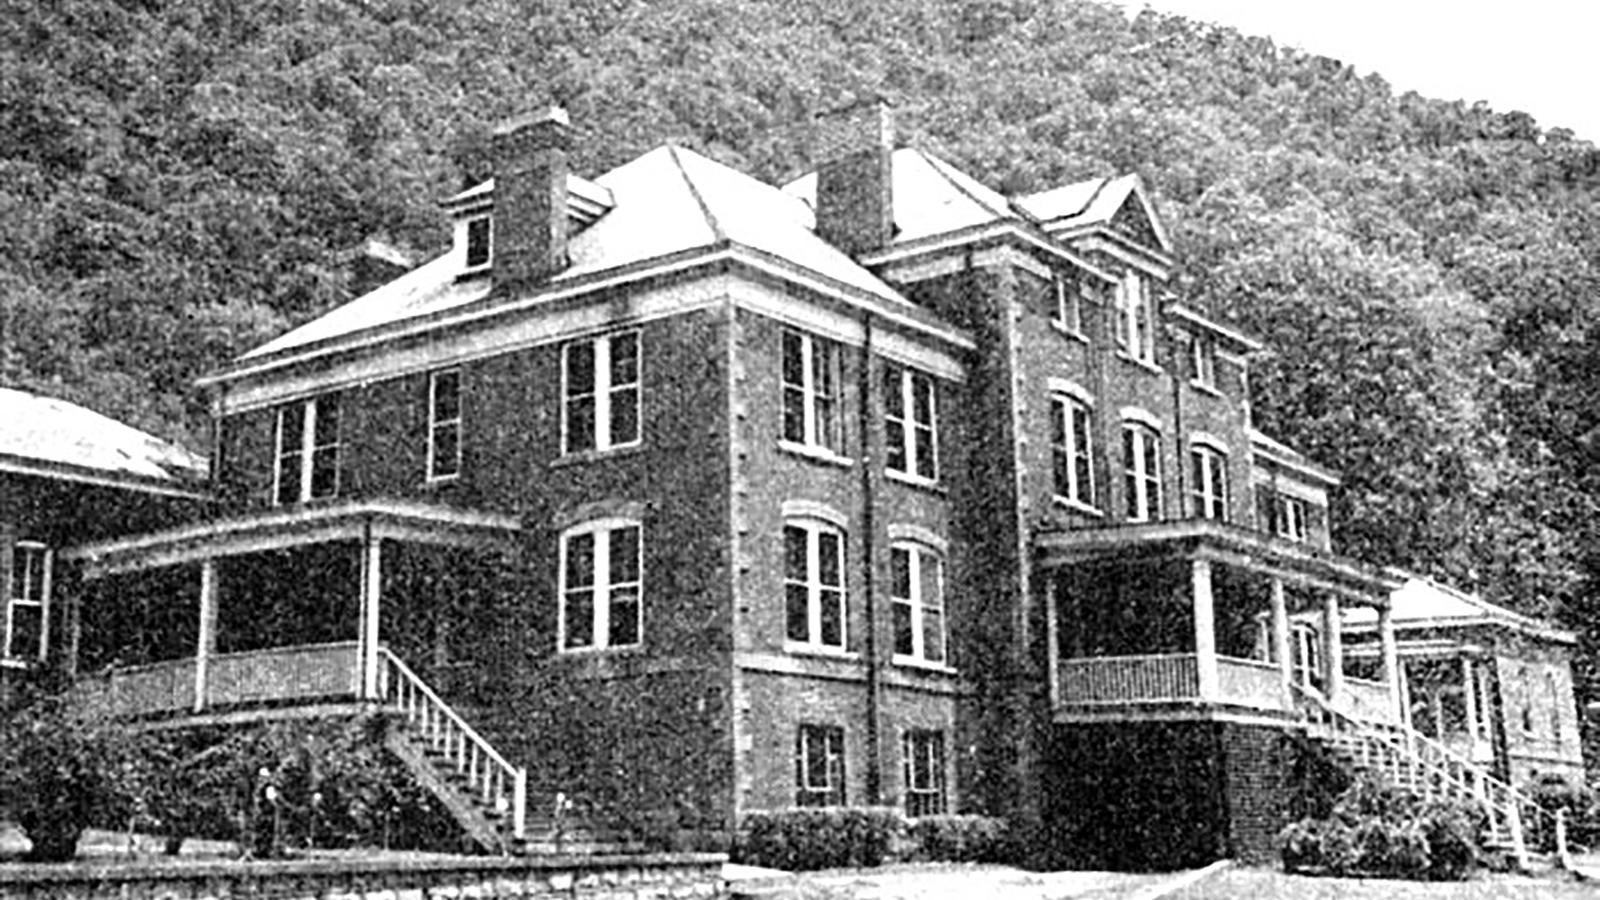 A historic black and white photo of a large, multi-story, old brick building